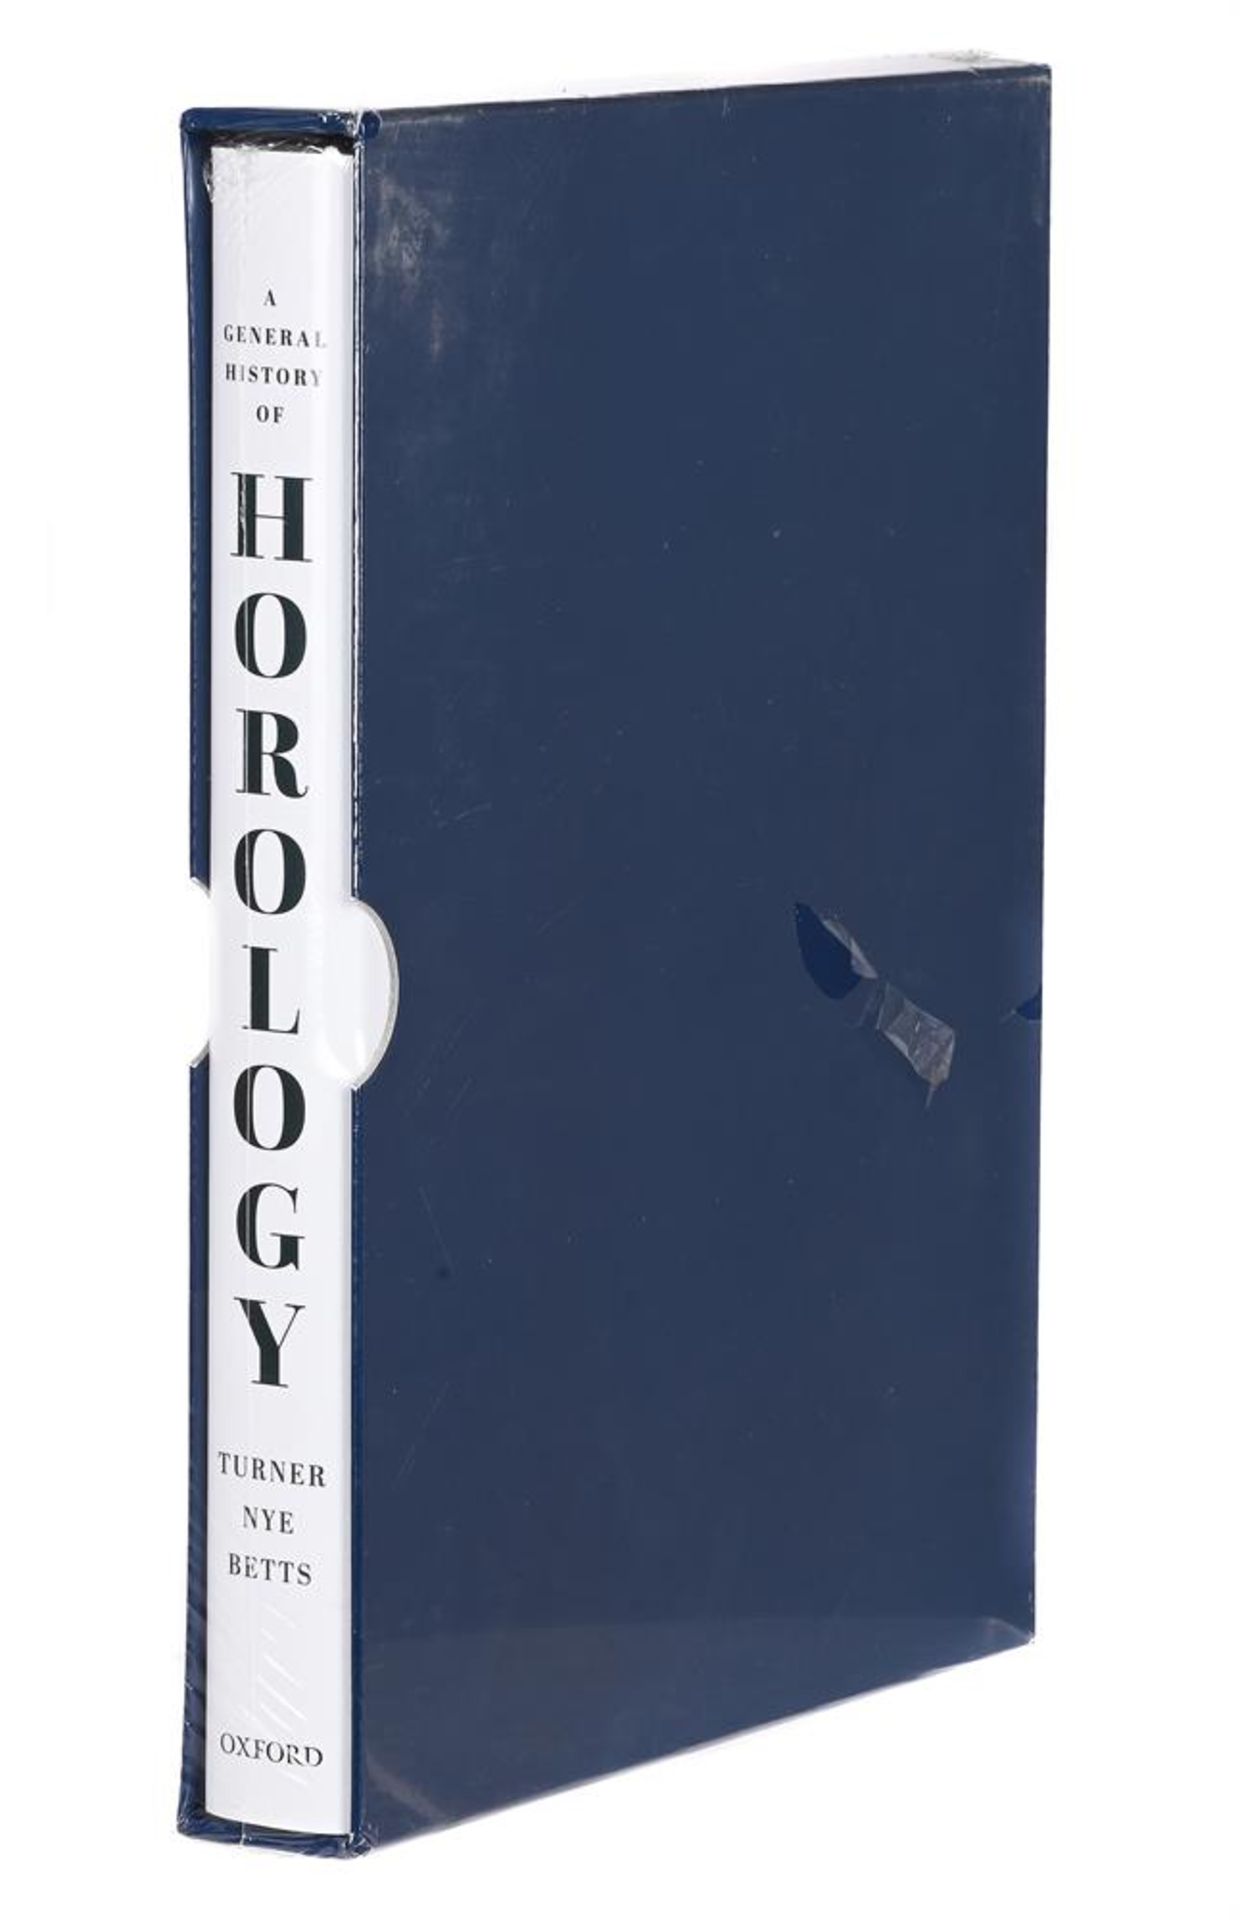 Ɵ TURNER, ANTHONY; NYE, JAMES AND BETTS, JONATHAN 'A GENERAL HISTORY OF HOROLOGY'